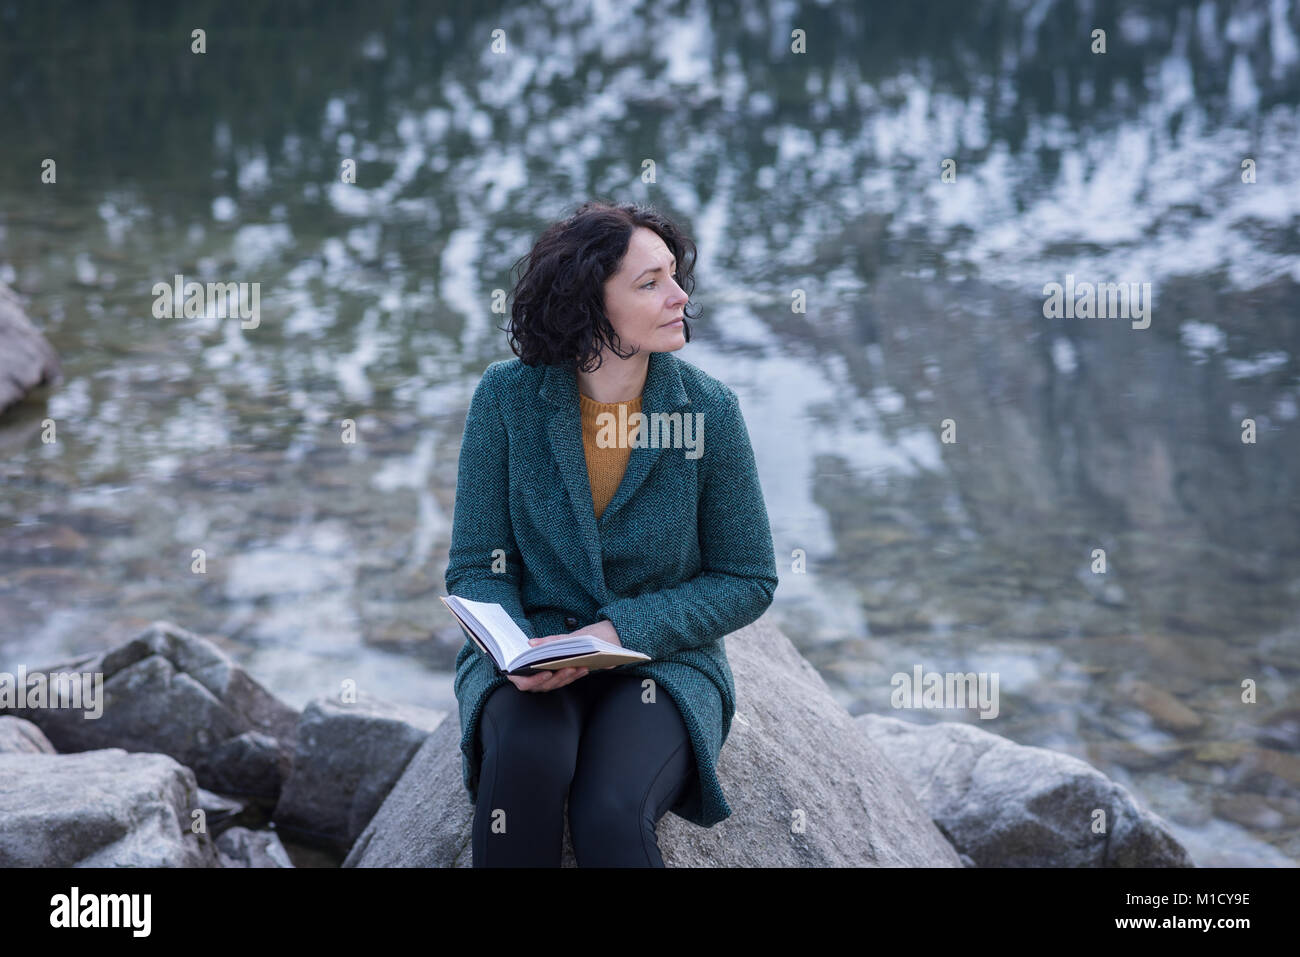 Thoughtful woman sitting with book at lakeside Stock Photo